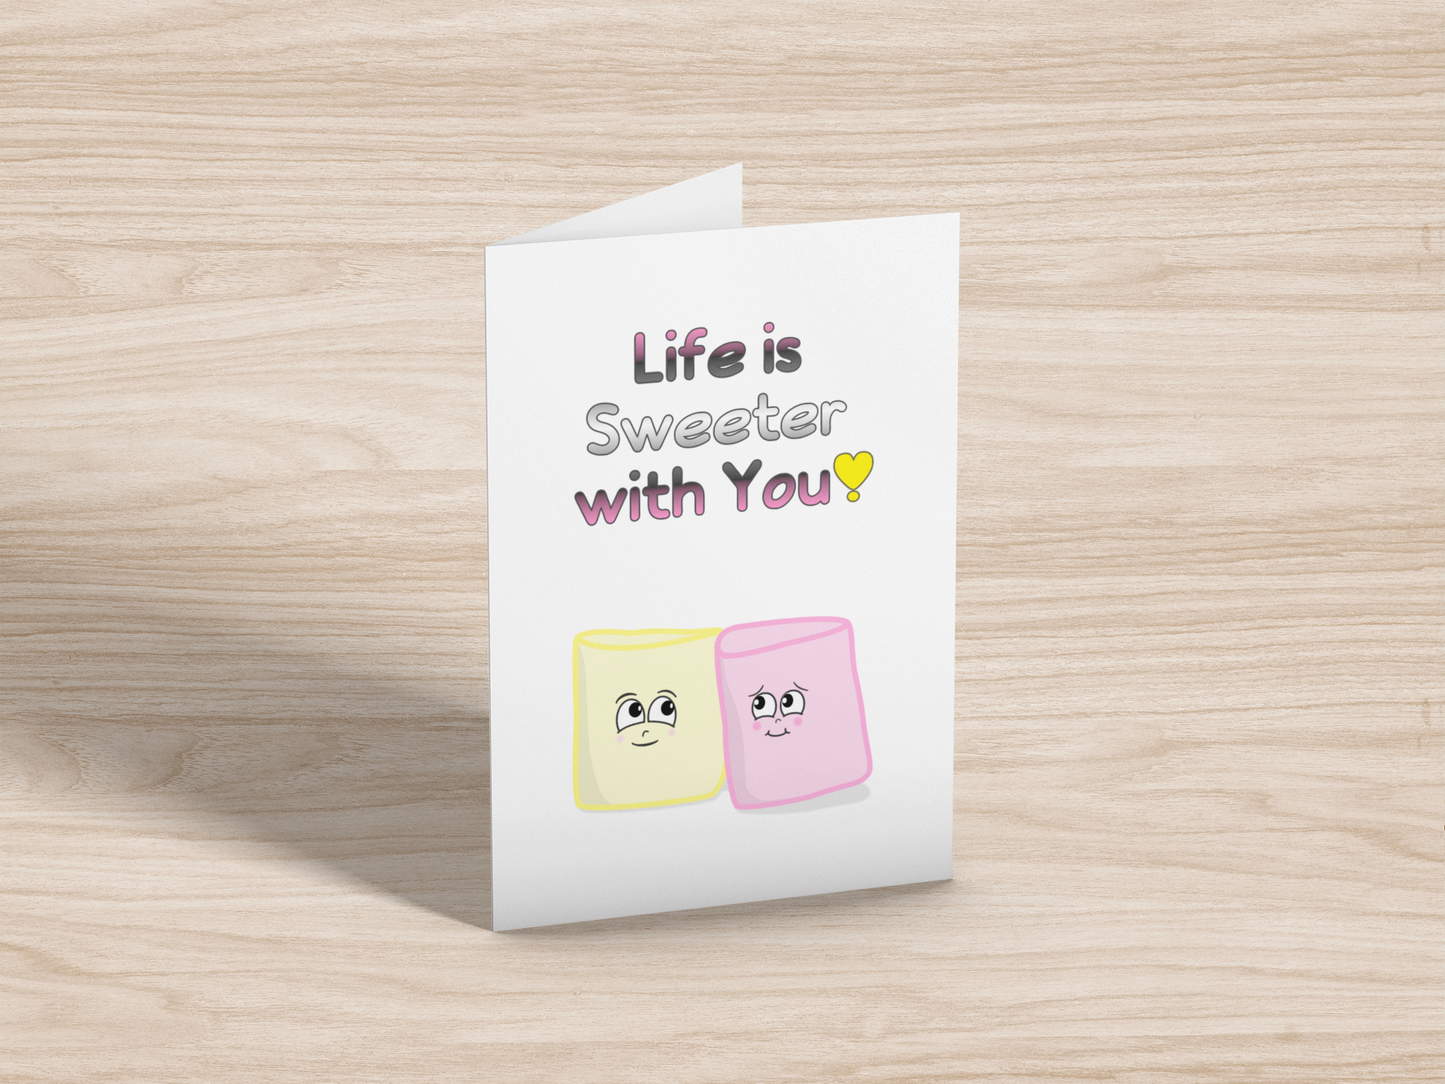 Life is Sweeter with You! Greeting Card & Sticker| Choose a Duo or Trio | Holidays